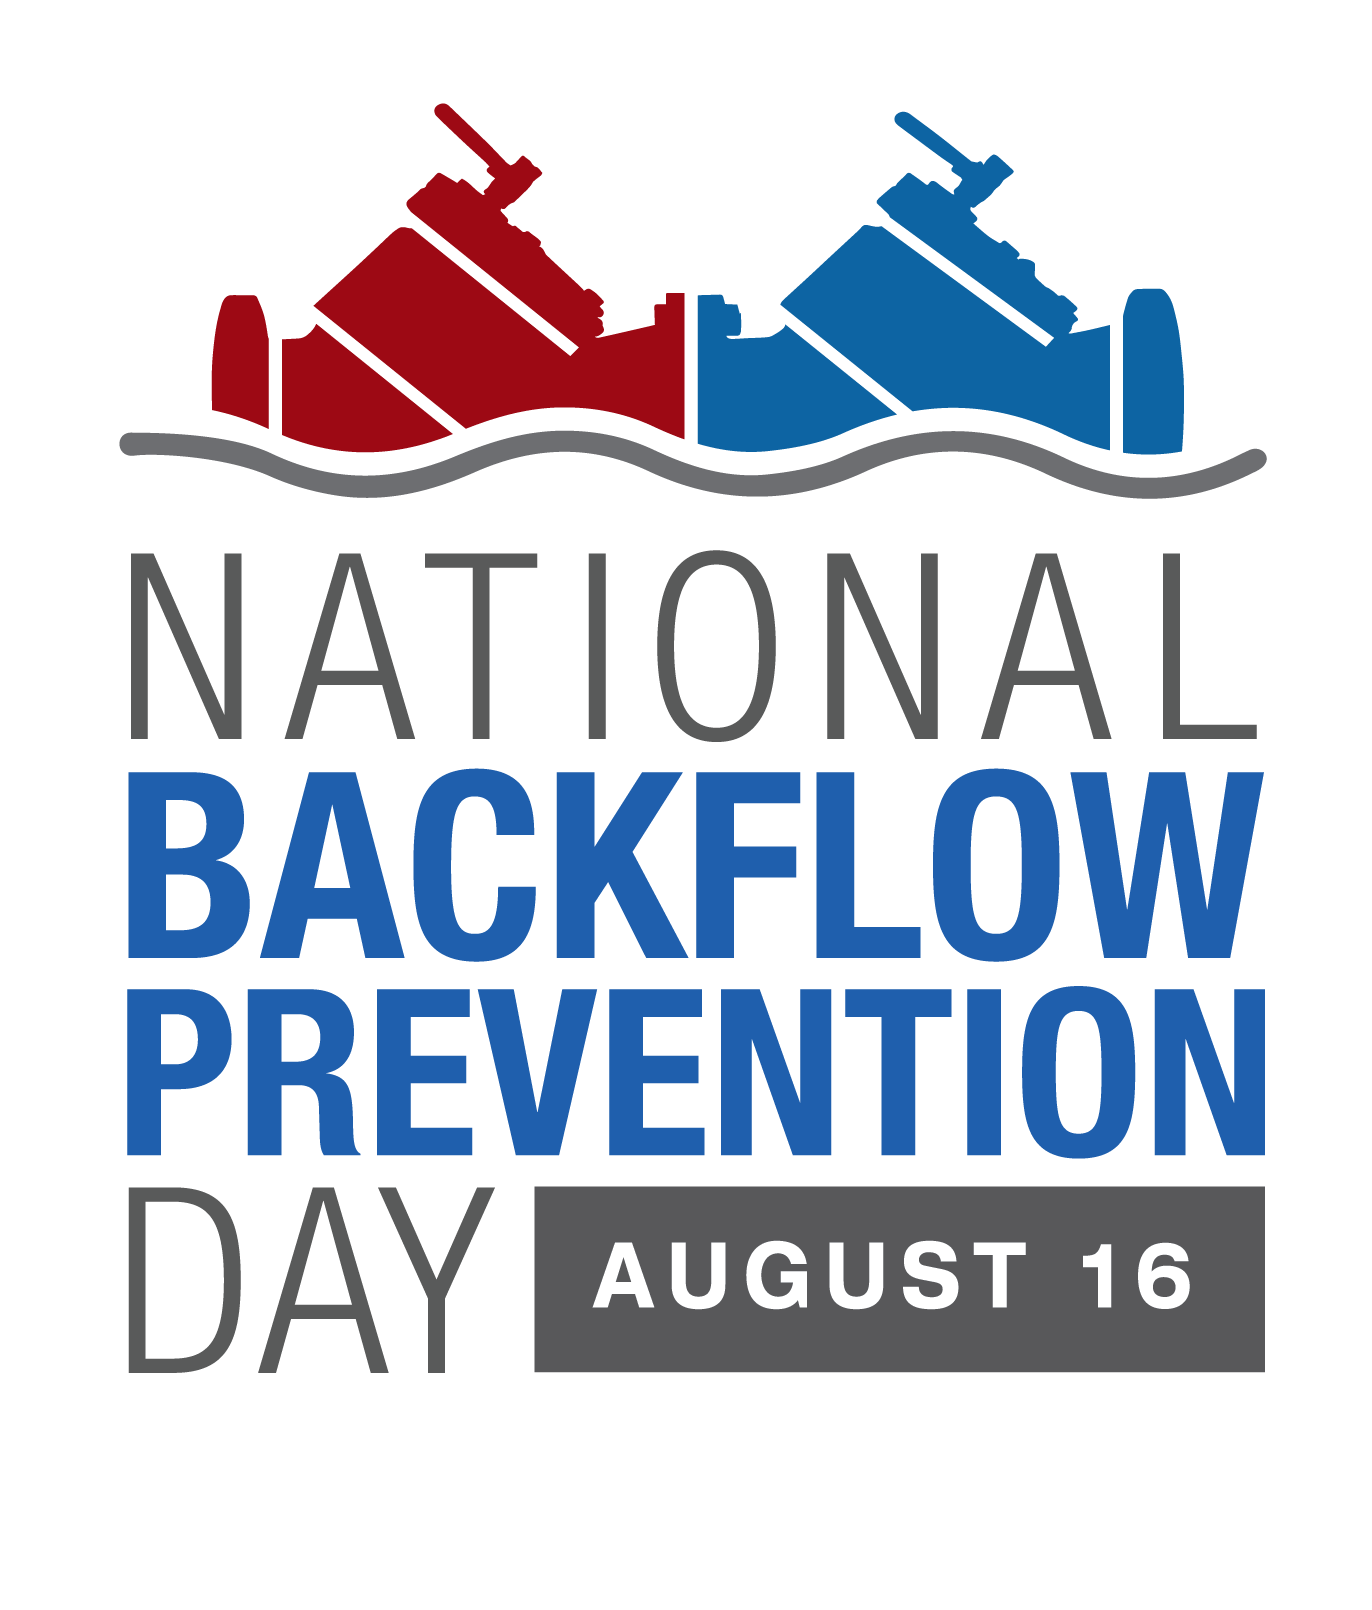 National Backflow Prevention Day